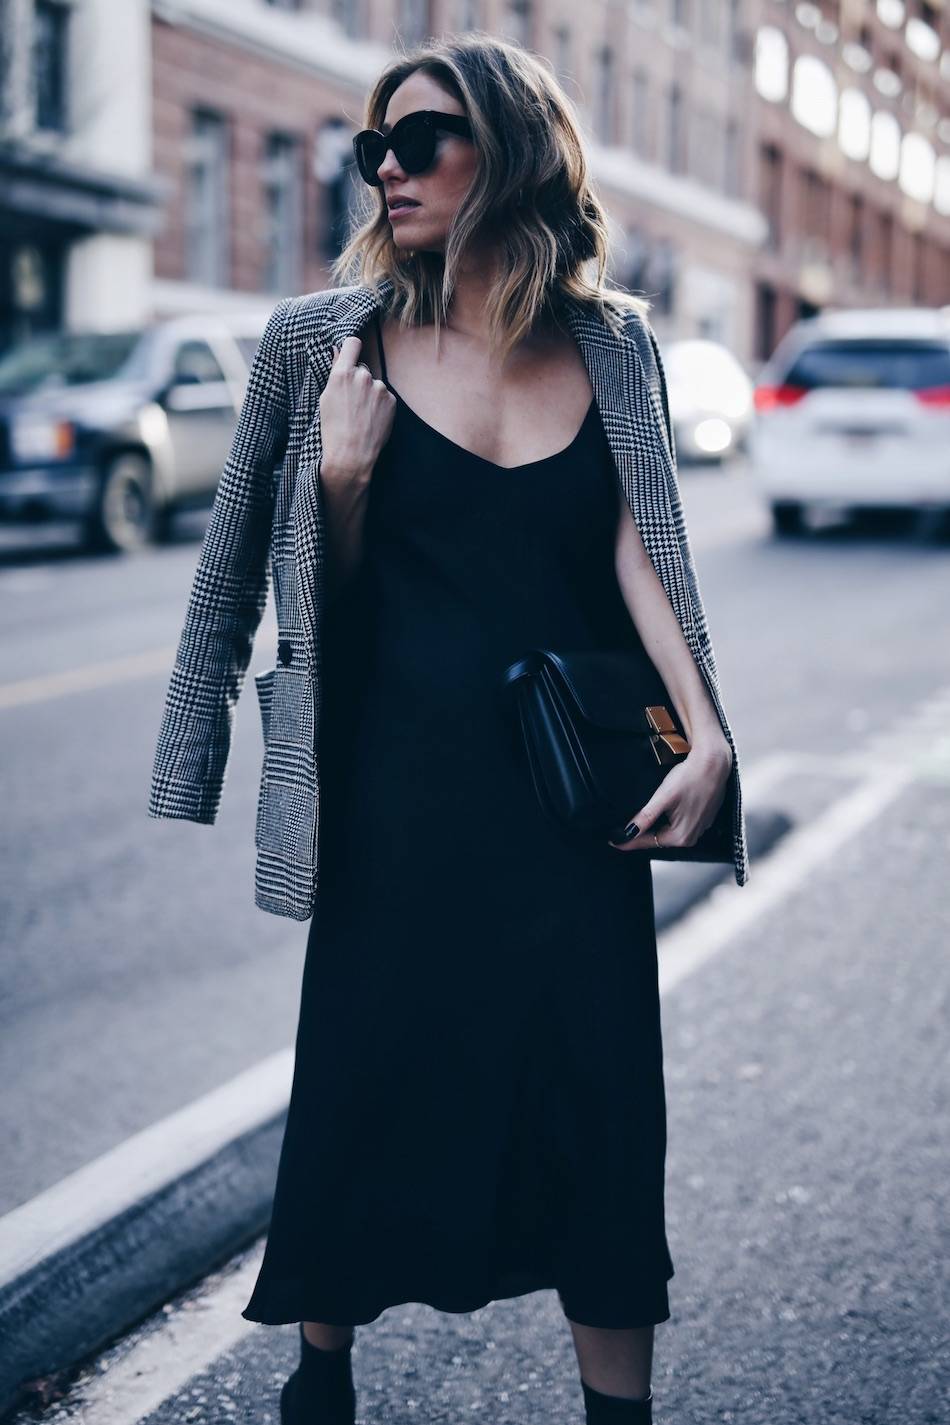 TOP 5 SLIP DRESSES YOU NEED NOW